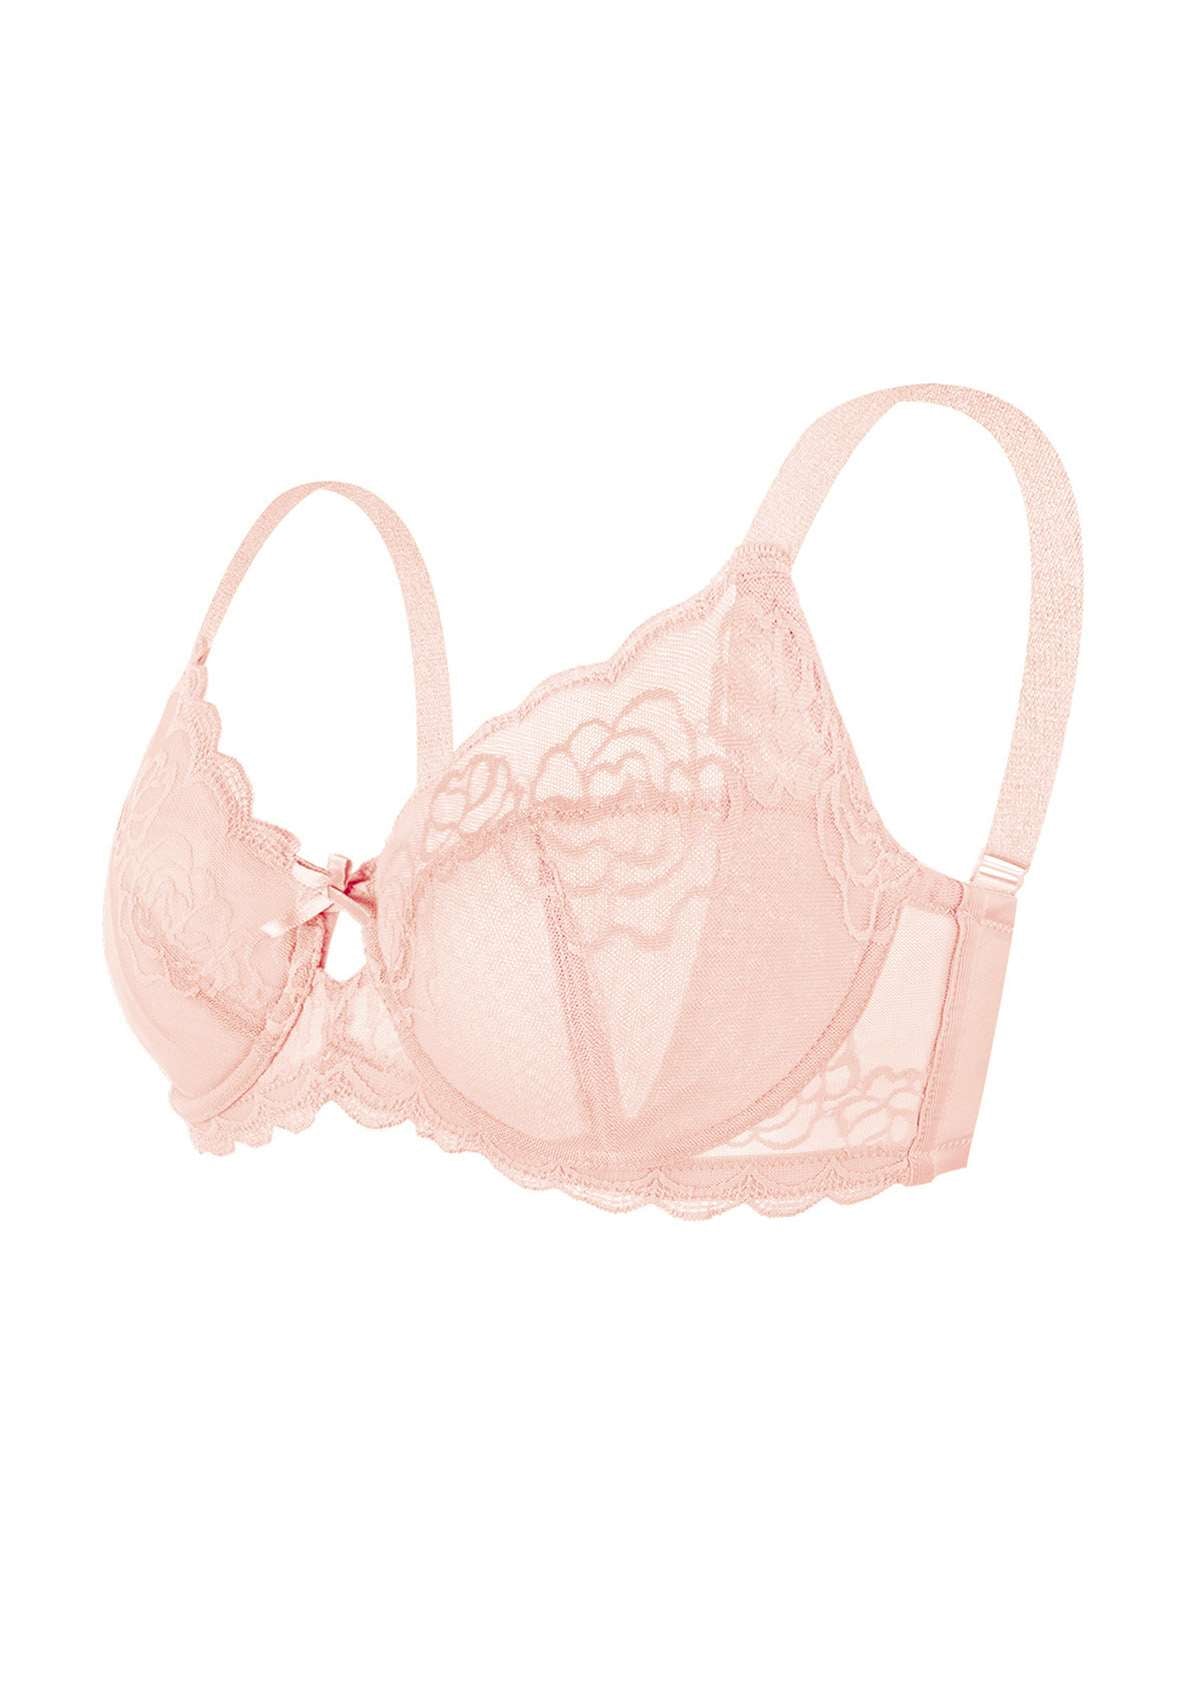 HSIA Rosa Bonica Sheer Lace Mesh Unlined Thin Comfy Woman Bra - Pink / 40 / DDD/F